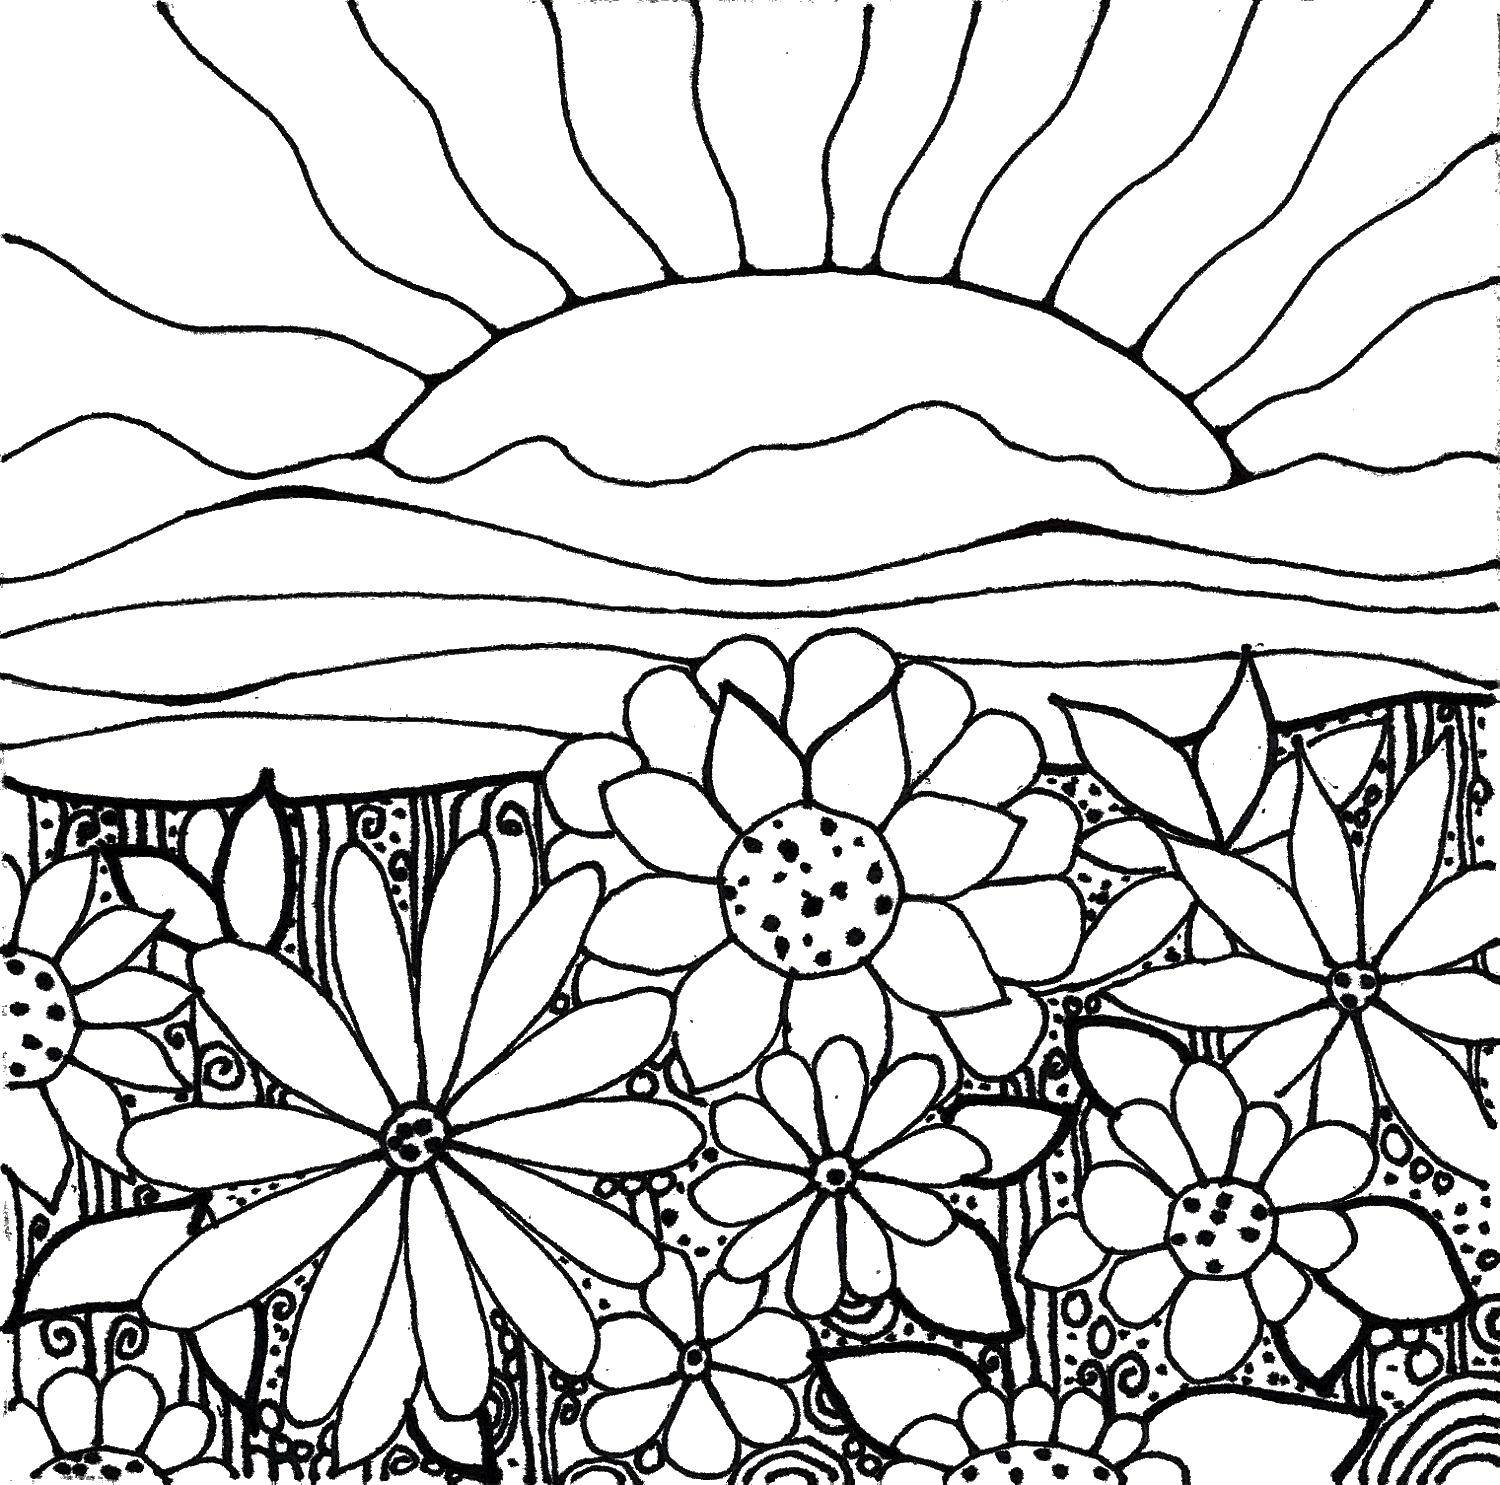 Online coloring pages coloring page sunrise over flowers coloring download print coloring page